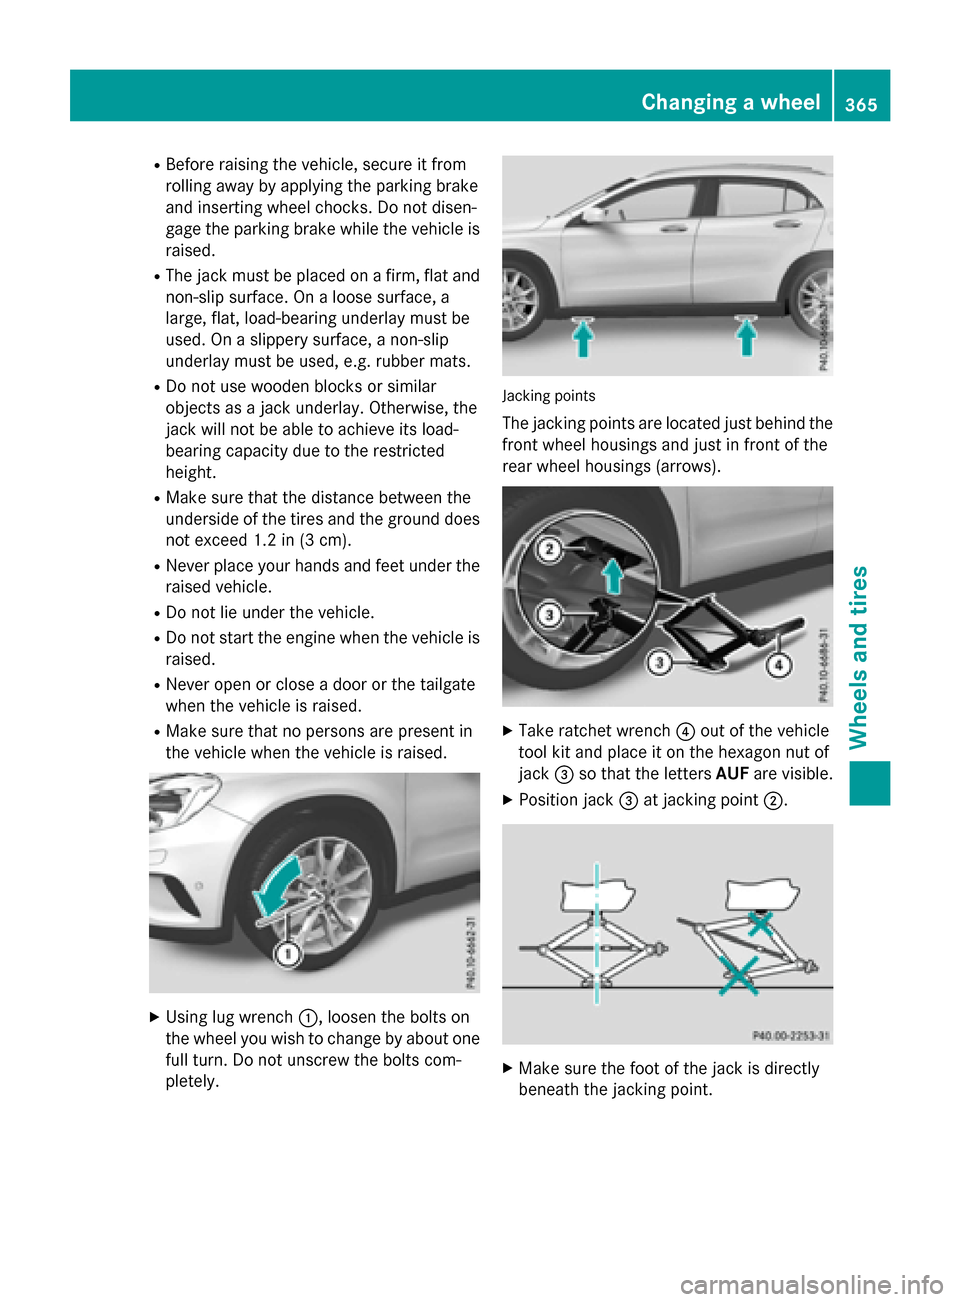 MERCEDES-BENZ GLA-Class 2017 X156 Owners Manual RBefore raising the vehicle, secure it from
rolling away by applying the parking brake
and inserting wheel chocks. Do not disen-
gage the parking brake while the vehicle is
raised.
RThe jack must be p